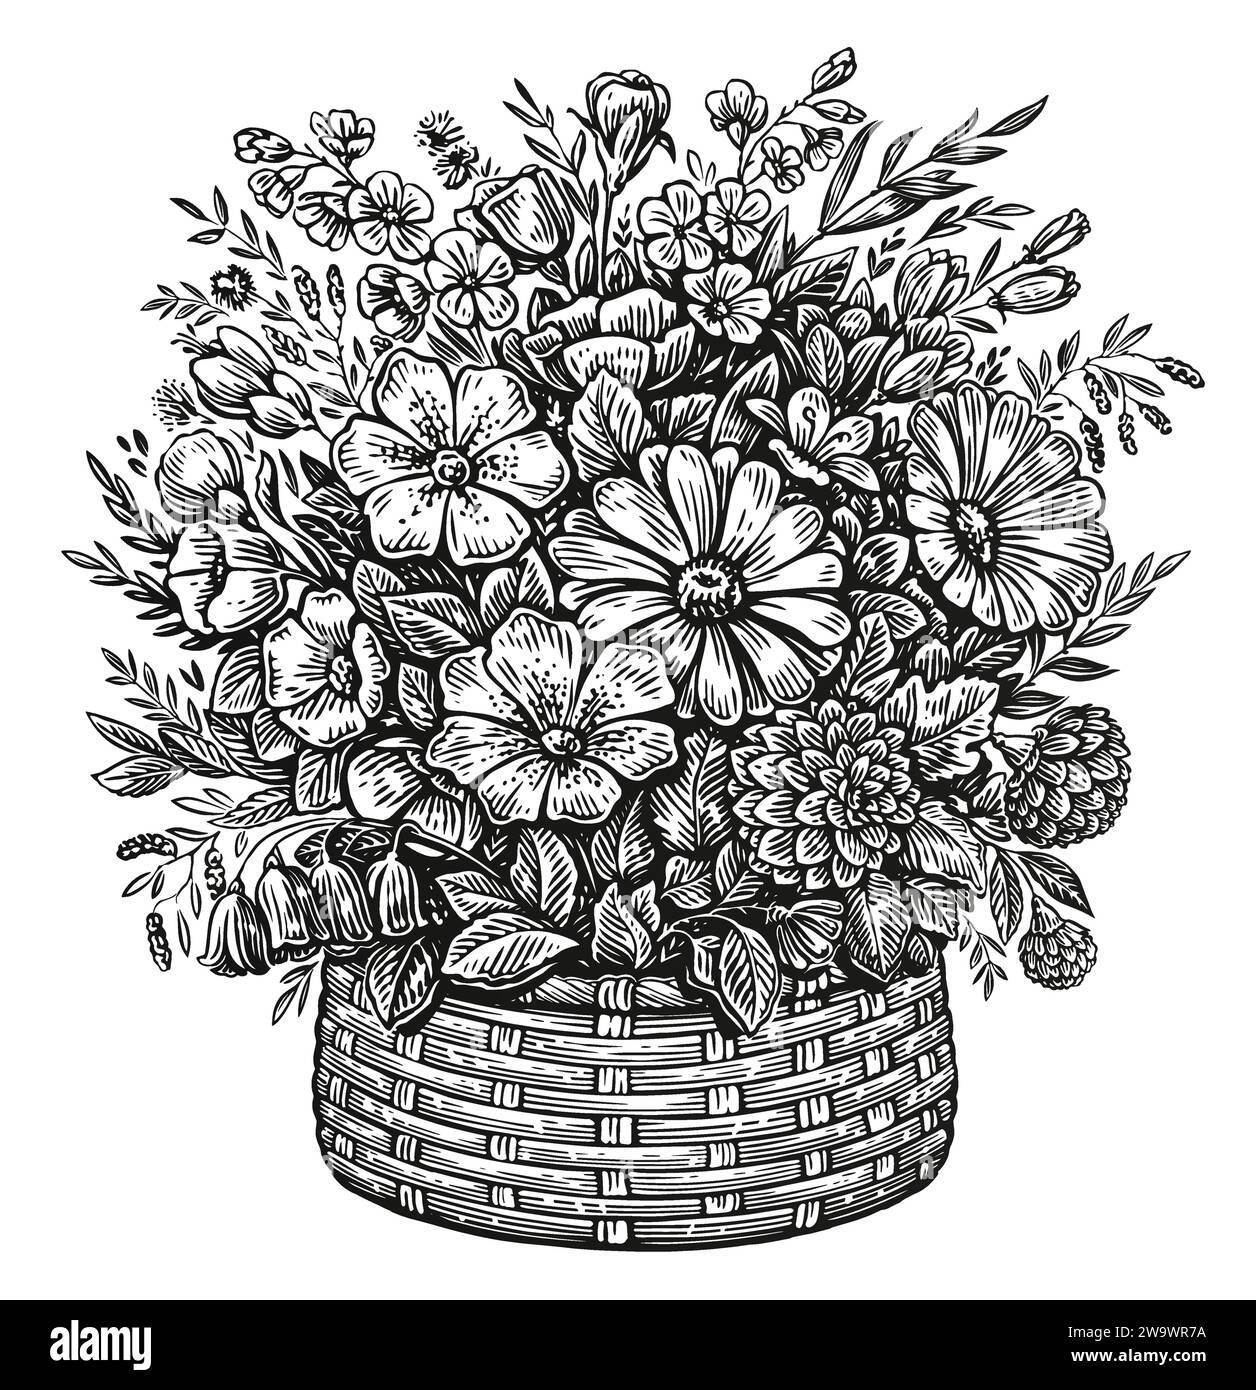 Flower arrangement sketch illustration. Hand drawn wicker basket with wildflowers in vintage engraving style Stock Vector